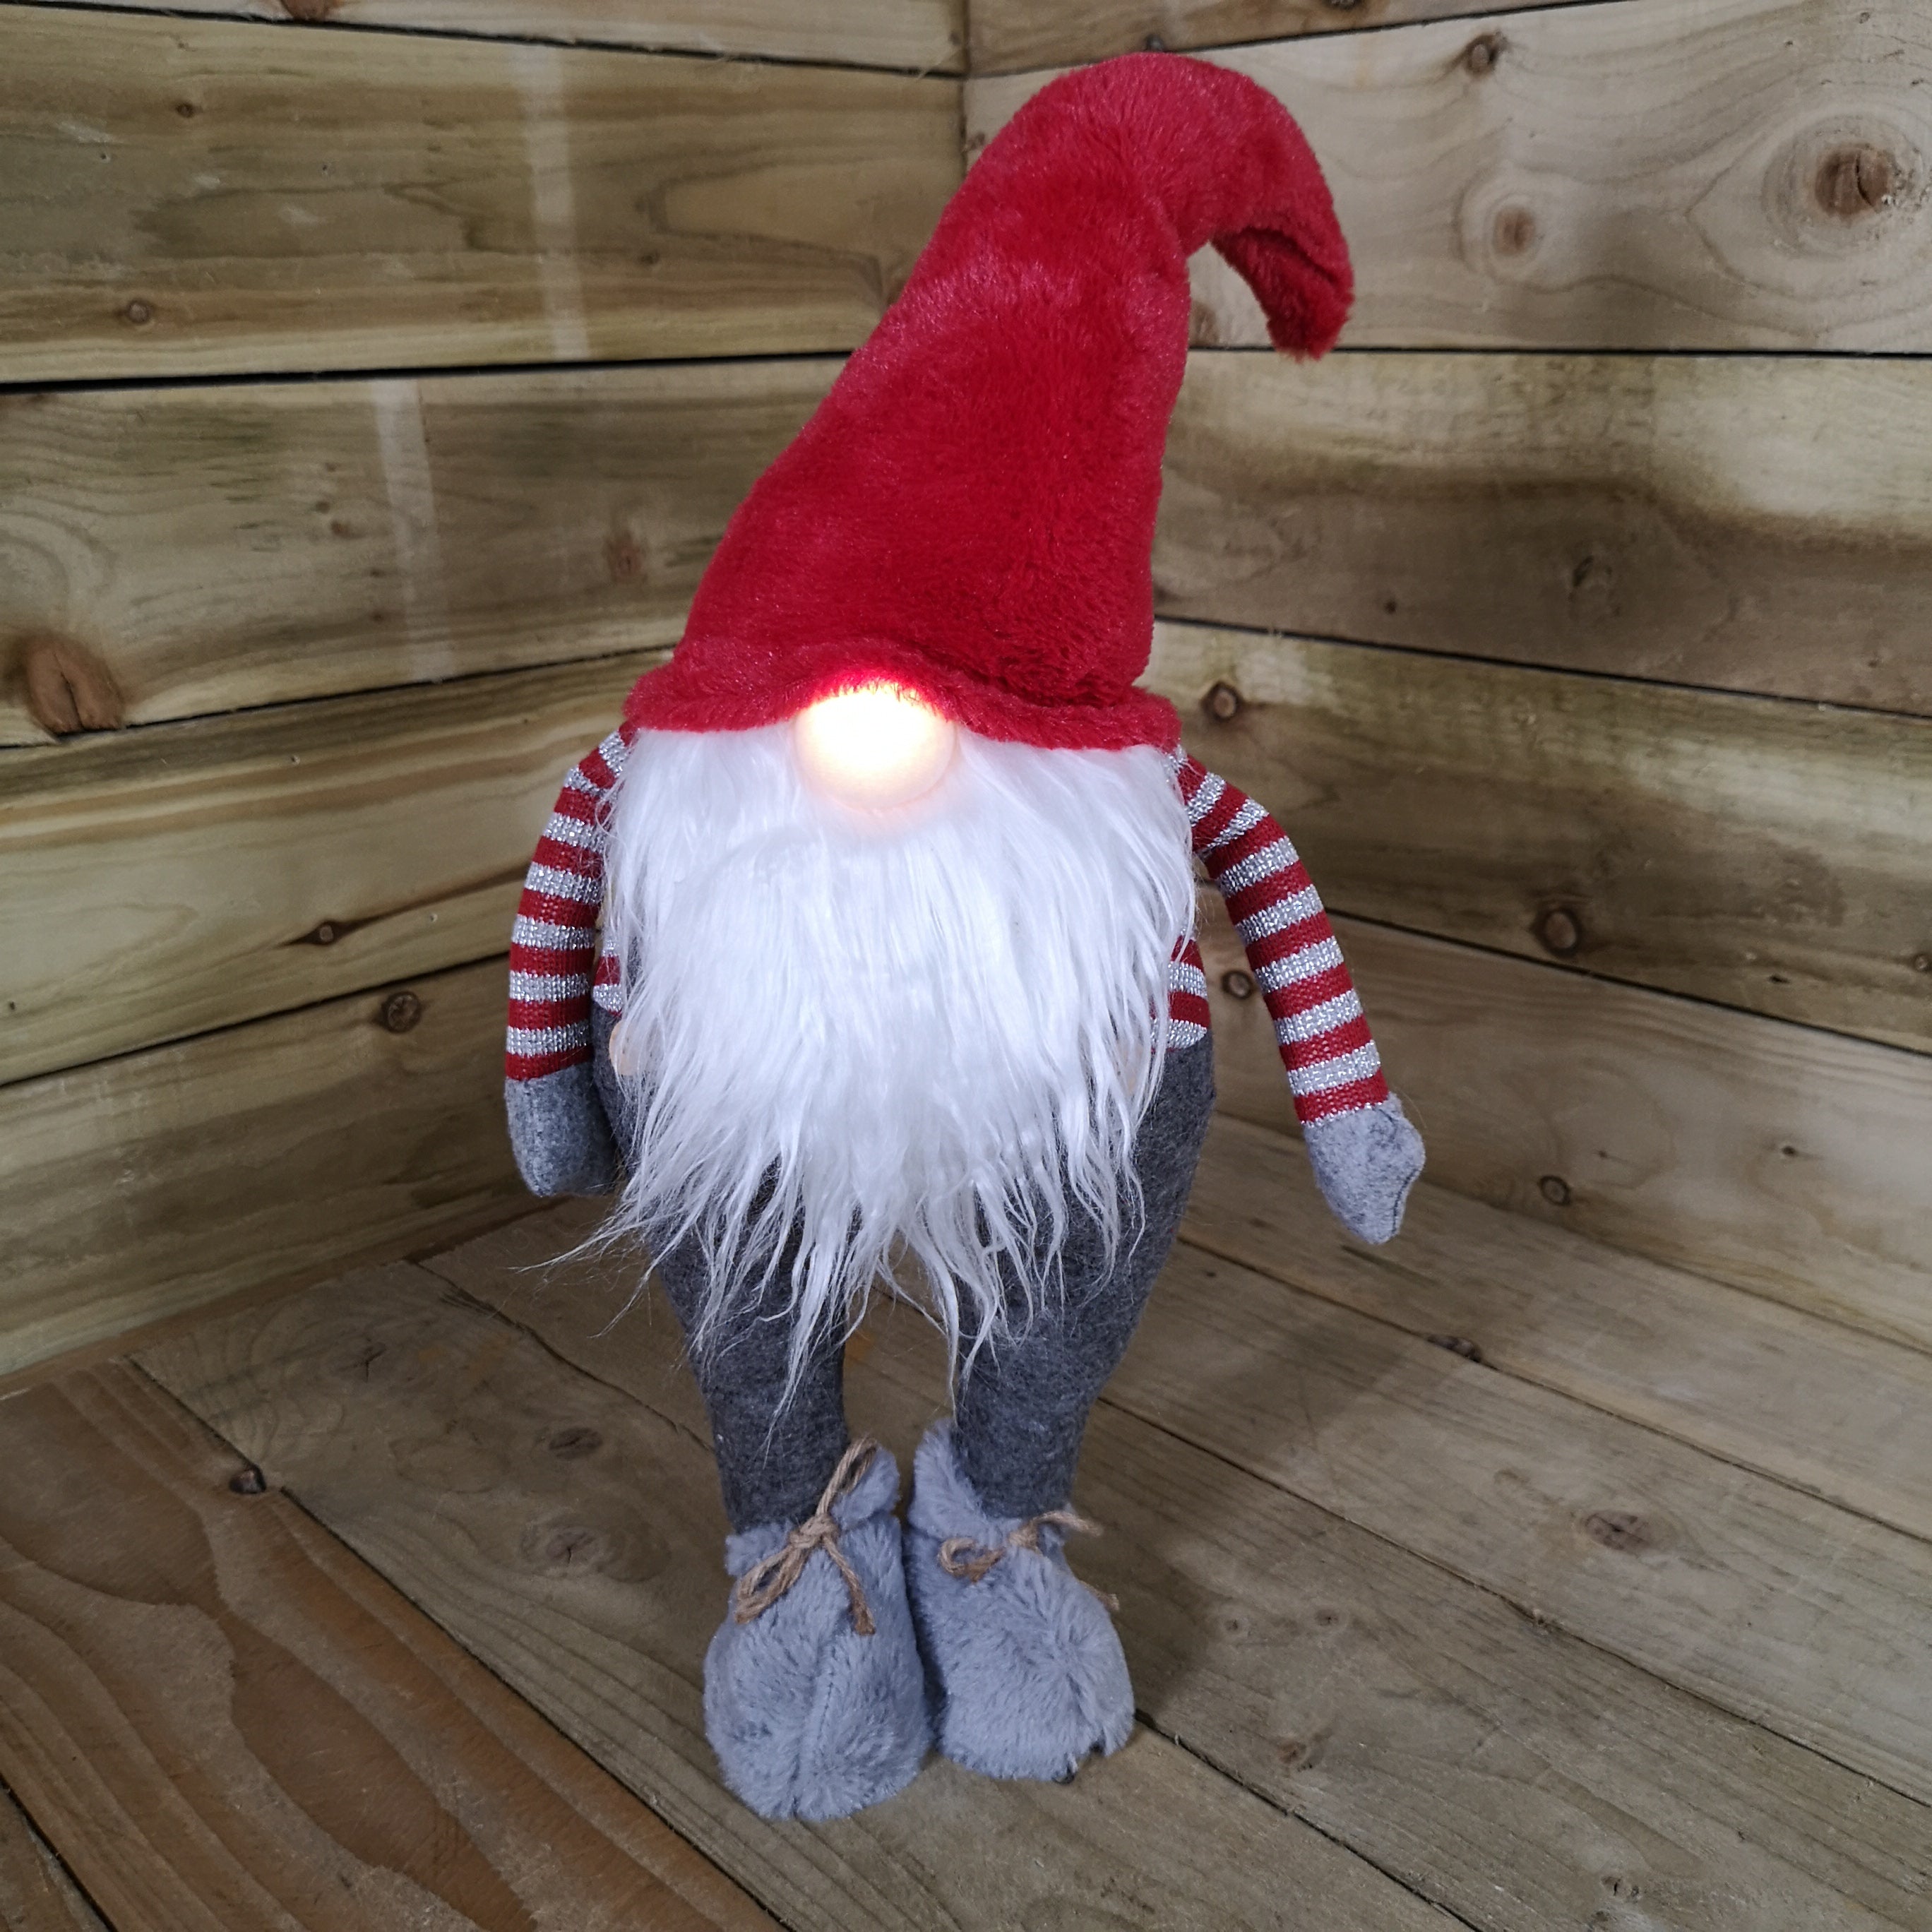 72cm Festive Christmas Light Up Lit Standing Red and Grey Christmas Gonk